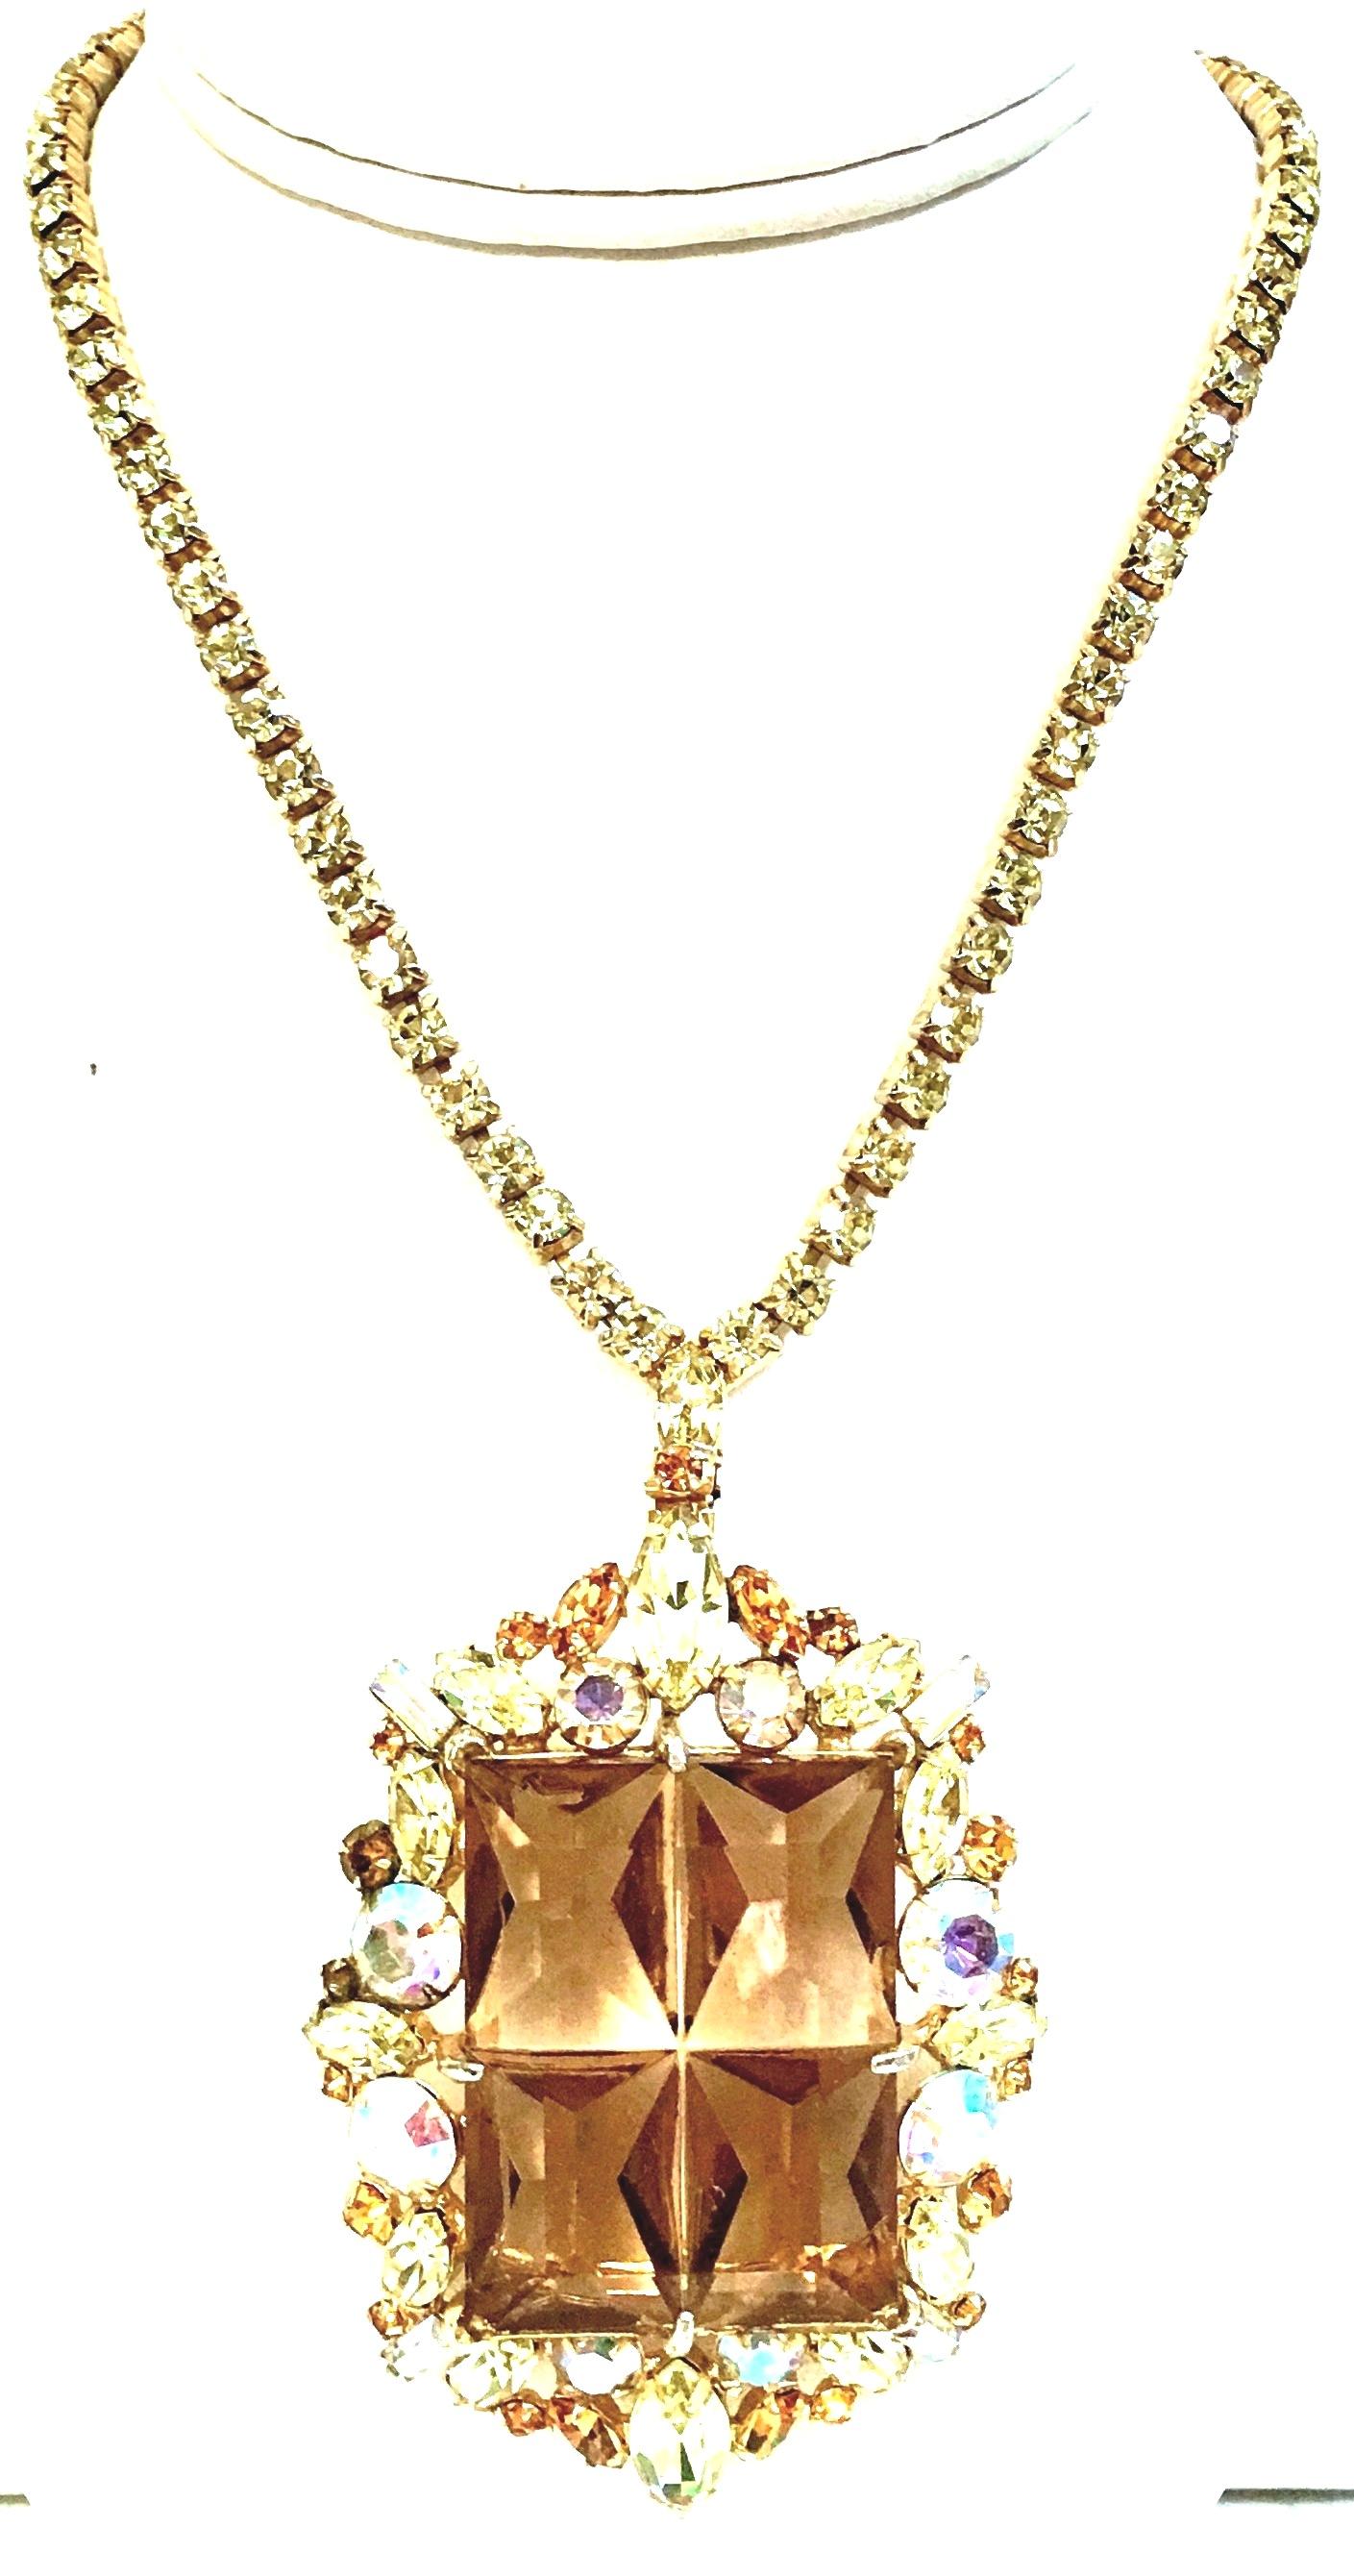 20th Century Gold, Crystal & Glass Demi Parure Necklace & Earrings S/4 In Good Condition For Sale In West Palm Beach, FL